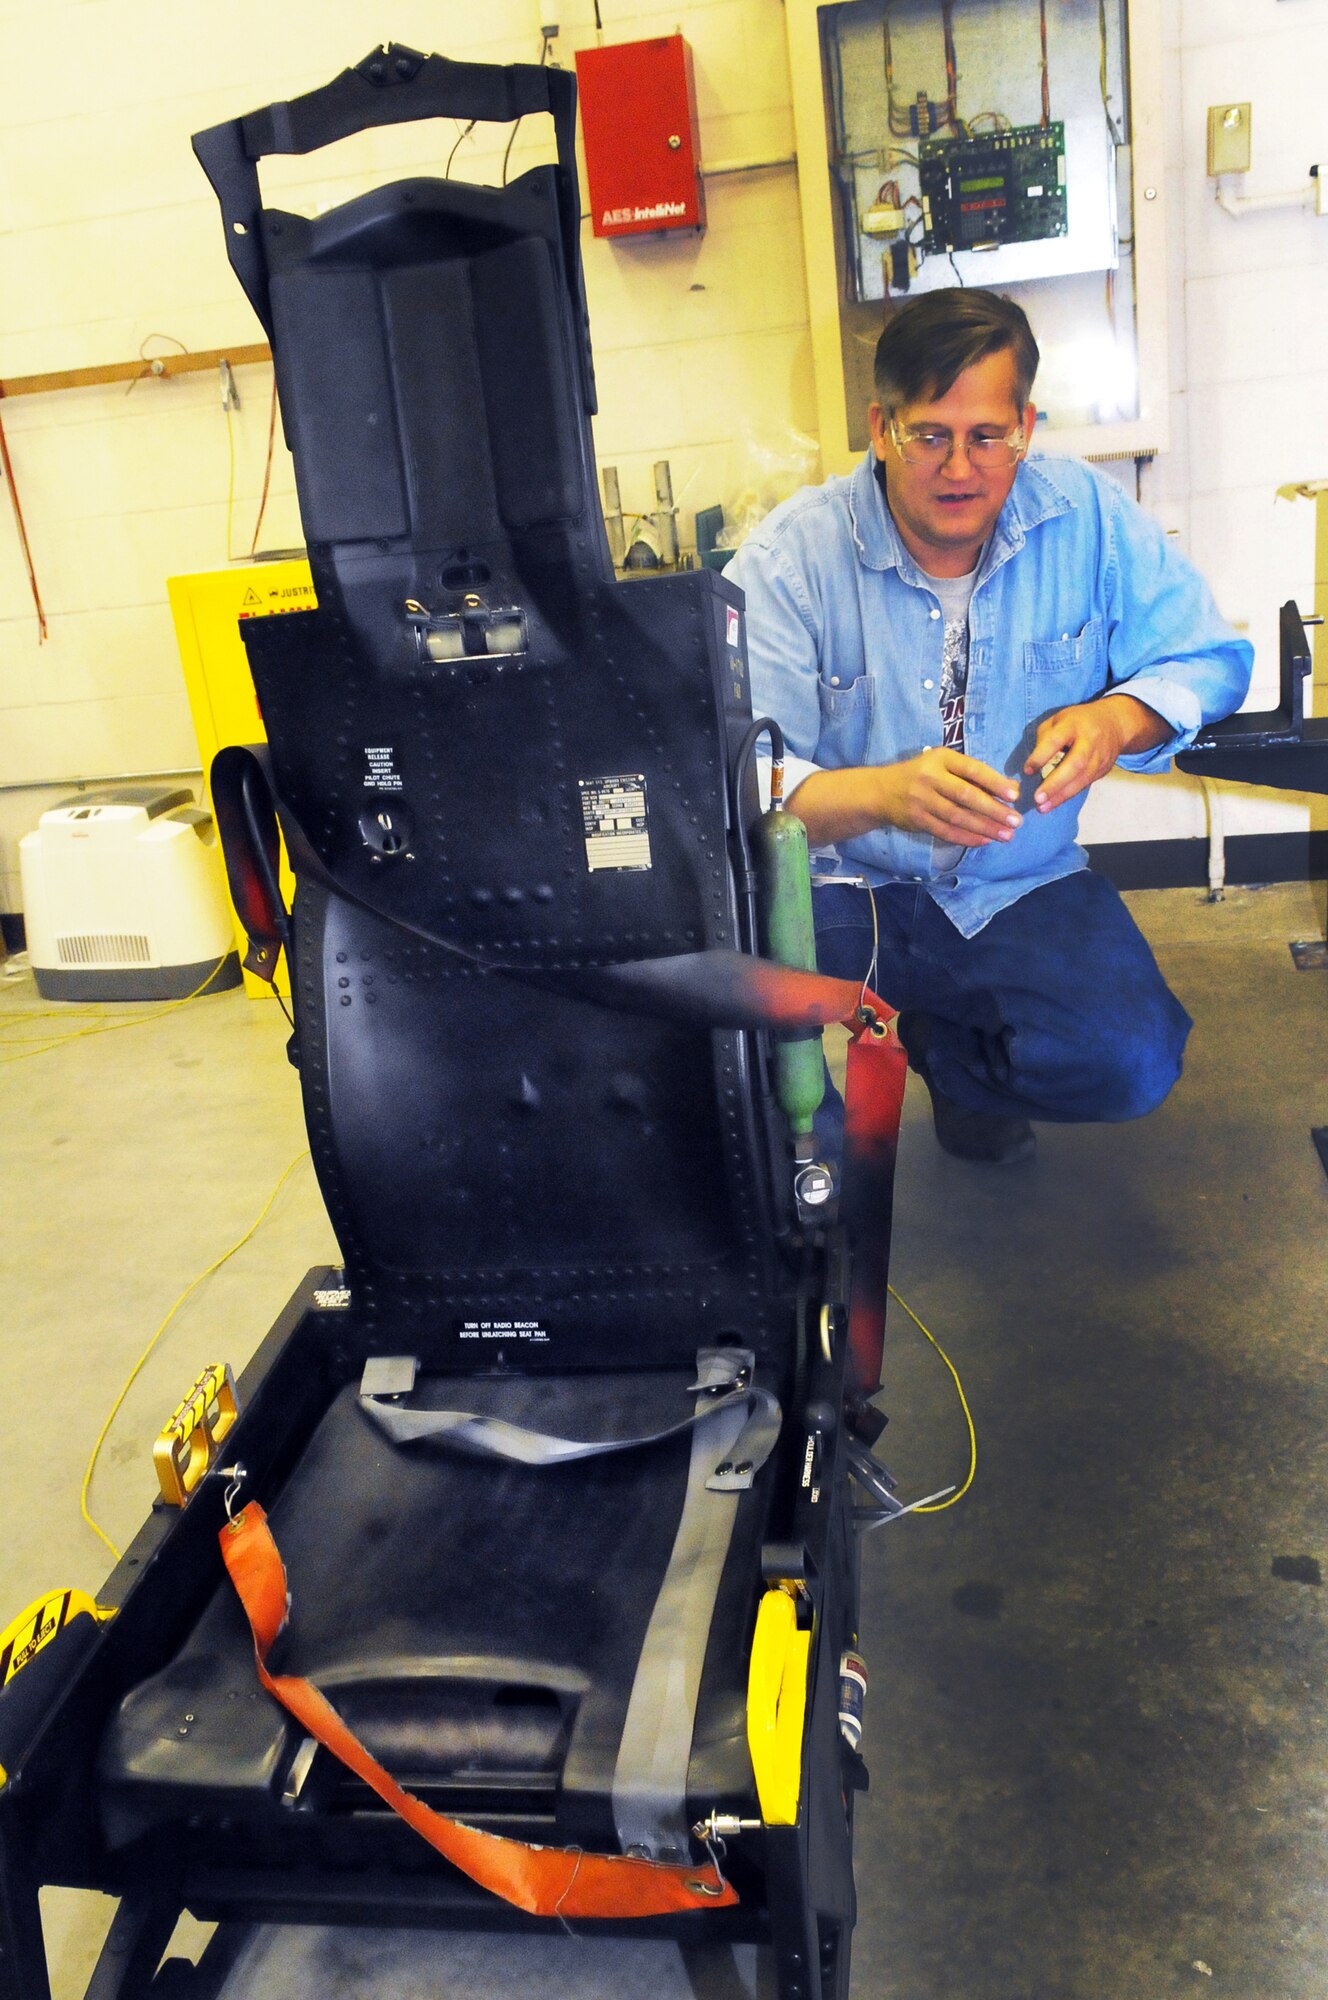 Phil Welch talks about how the ACES II seat works. U. S. Air Force photo by Sue Sapp